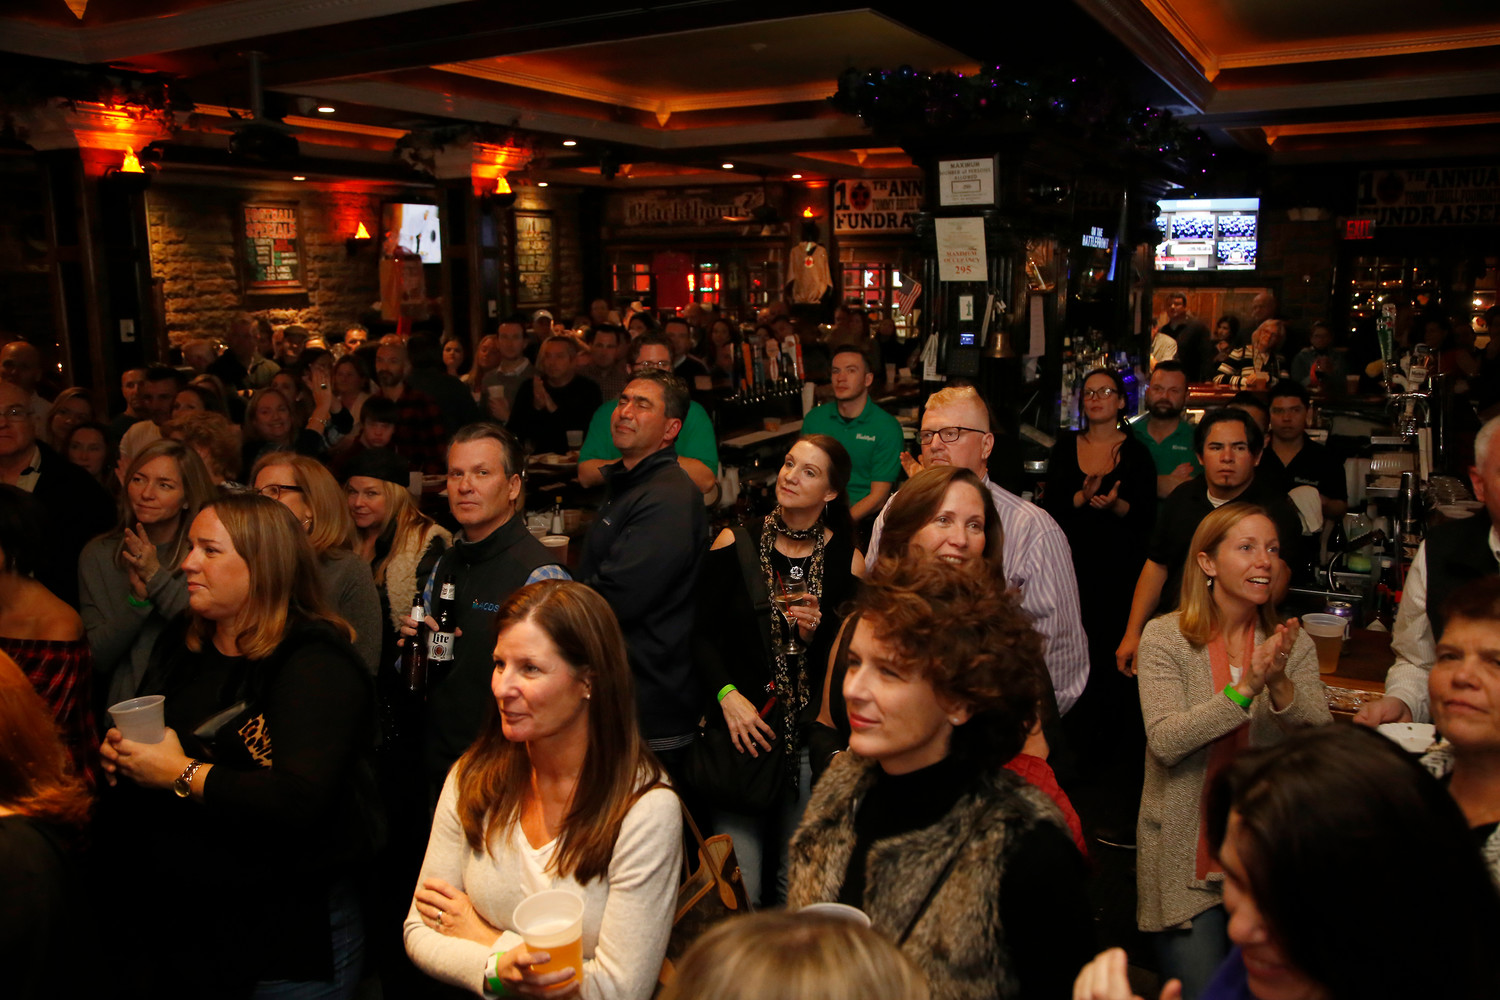 Dozens packed Rockville Centre’s Cannon’s Blackthorn for the event.